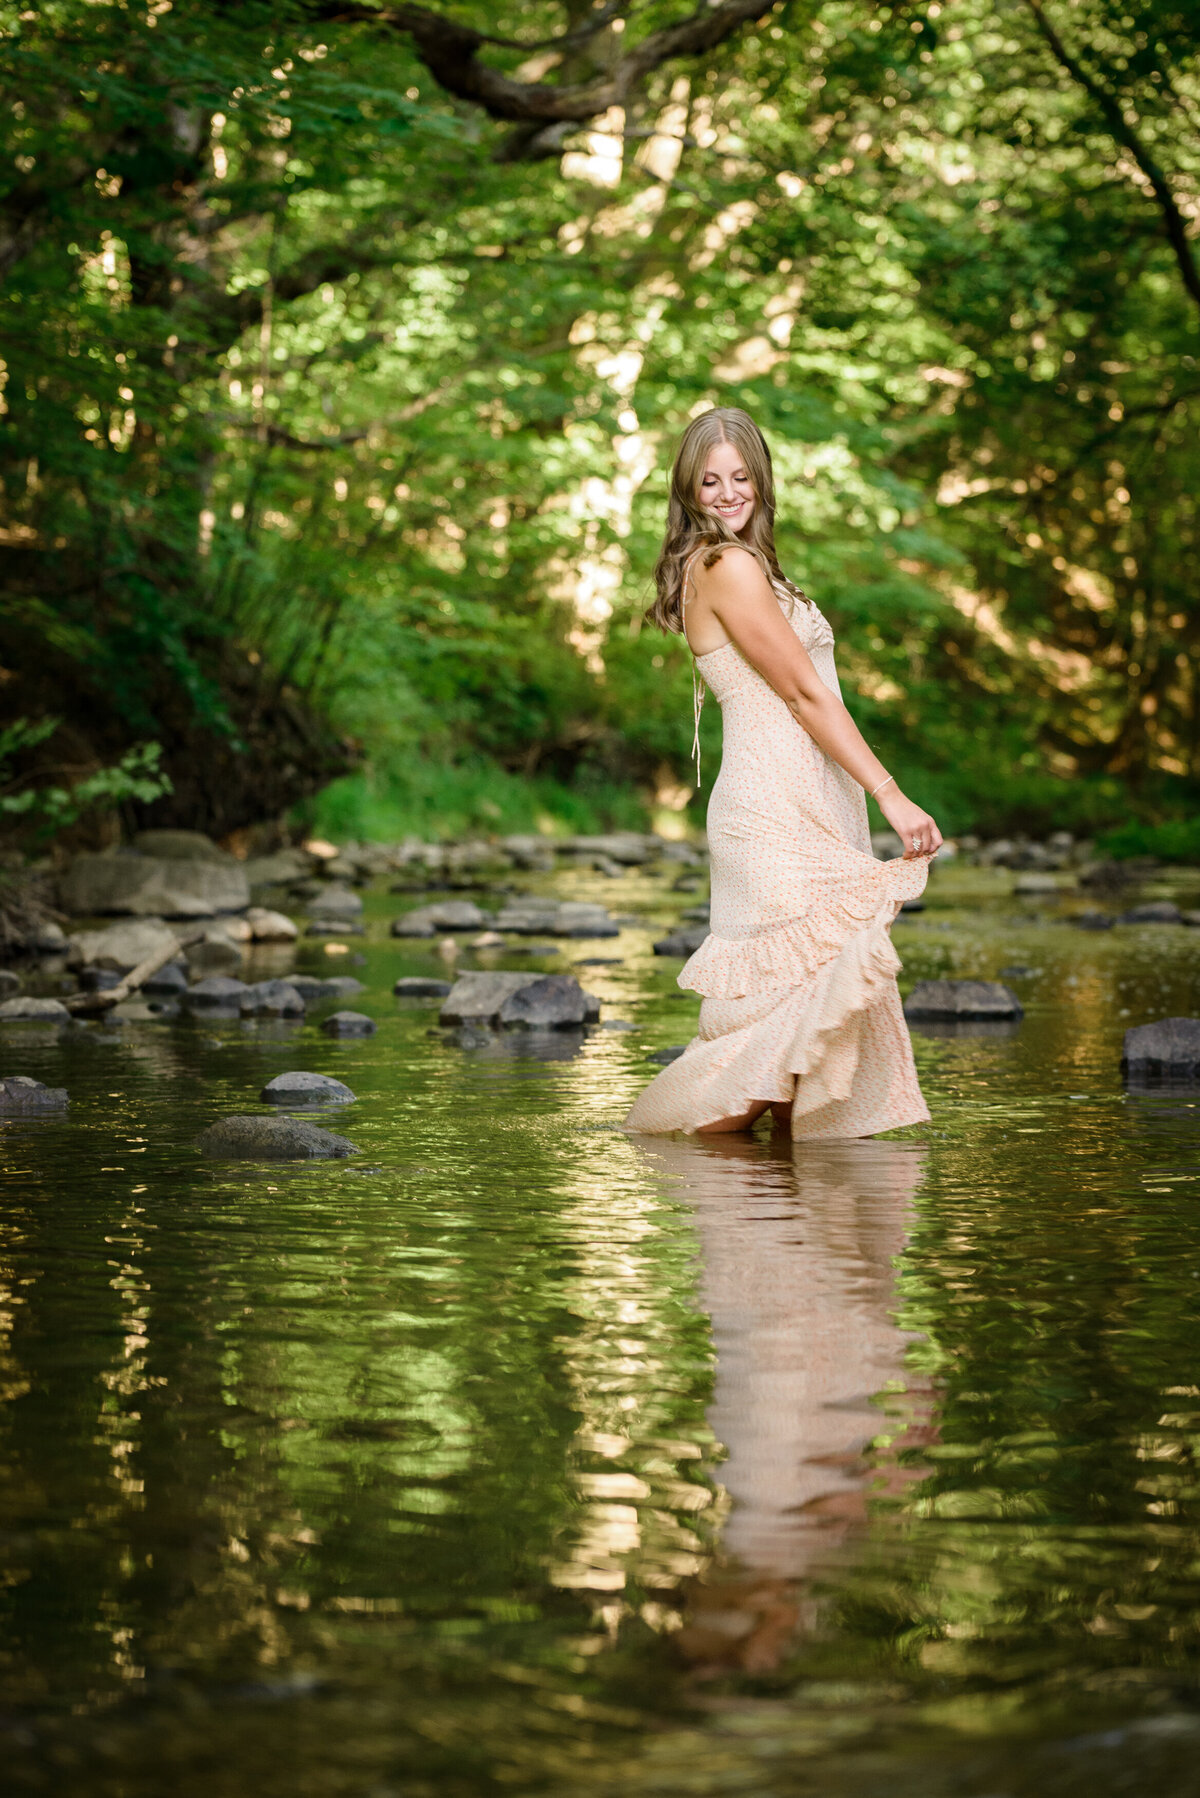 Senior Pictures in water Holland MI Images by Jennifer-19